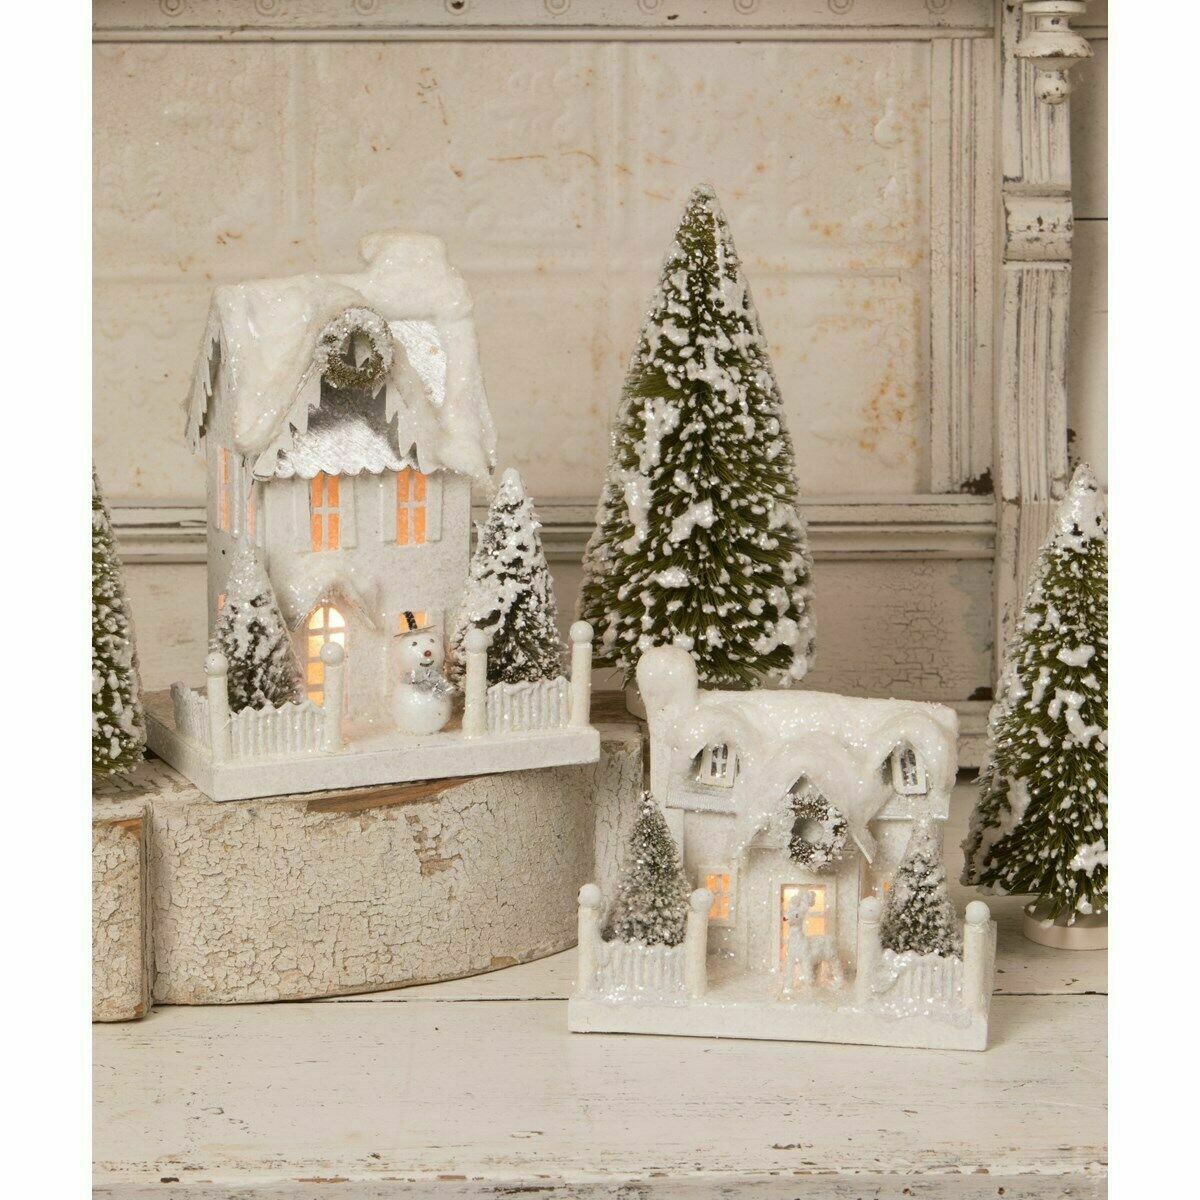 Christmas Bethany Lowe Ivory Cottage 2pc Putz Style Houses LG 1772 - The Primitive Pineapple Collection